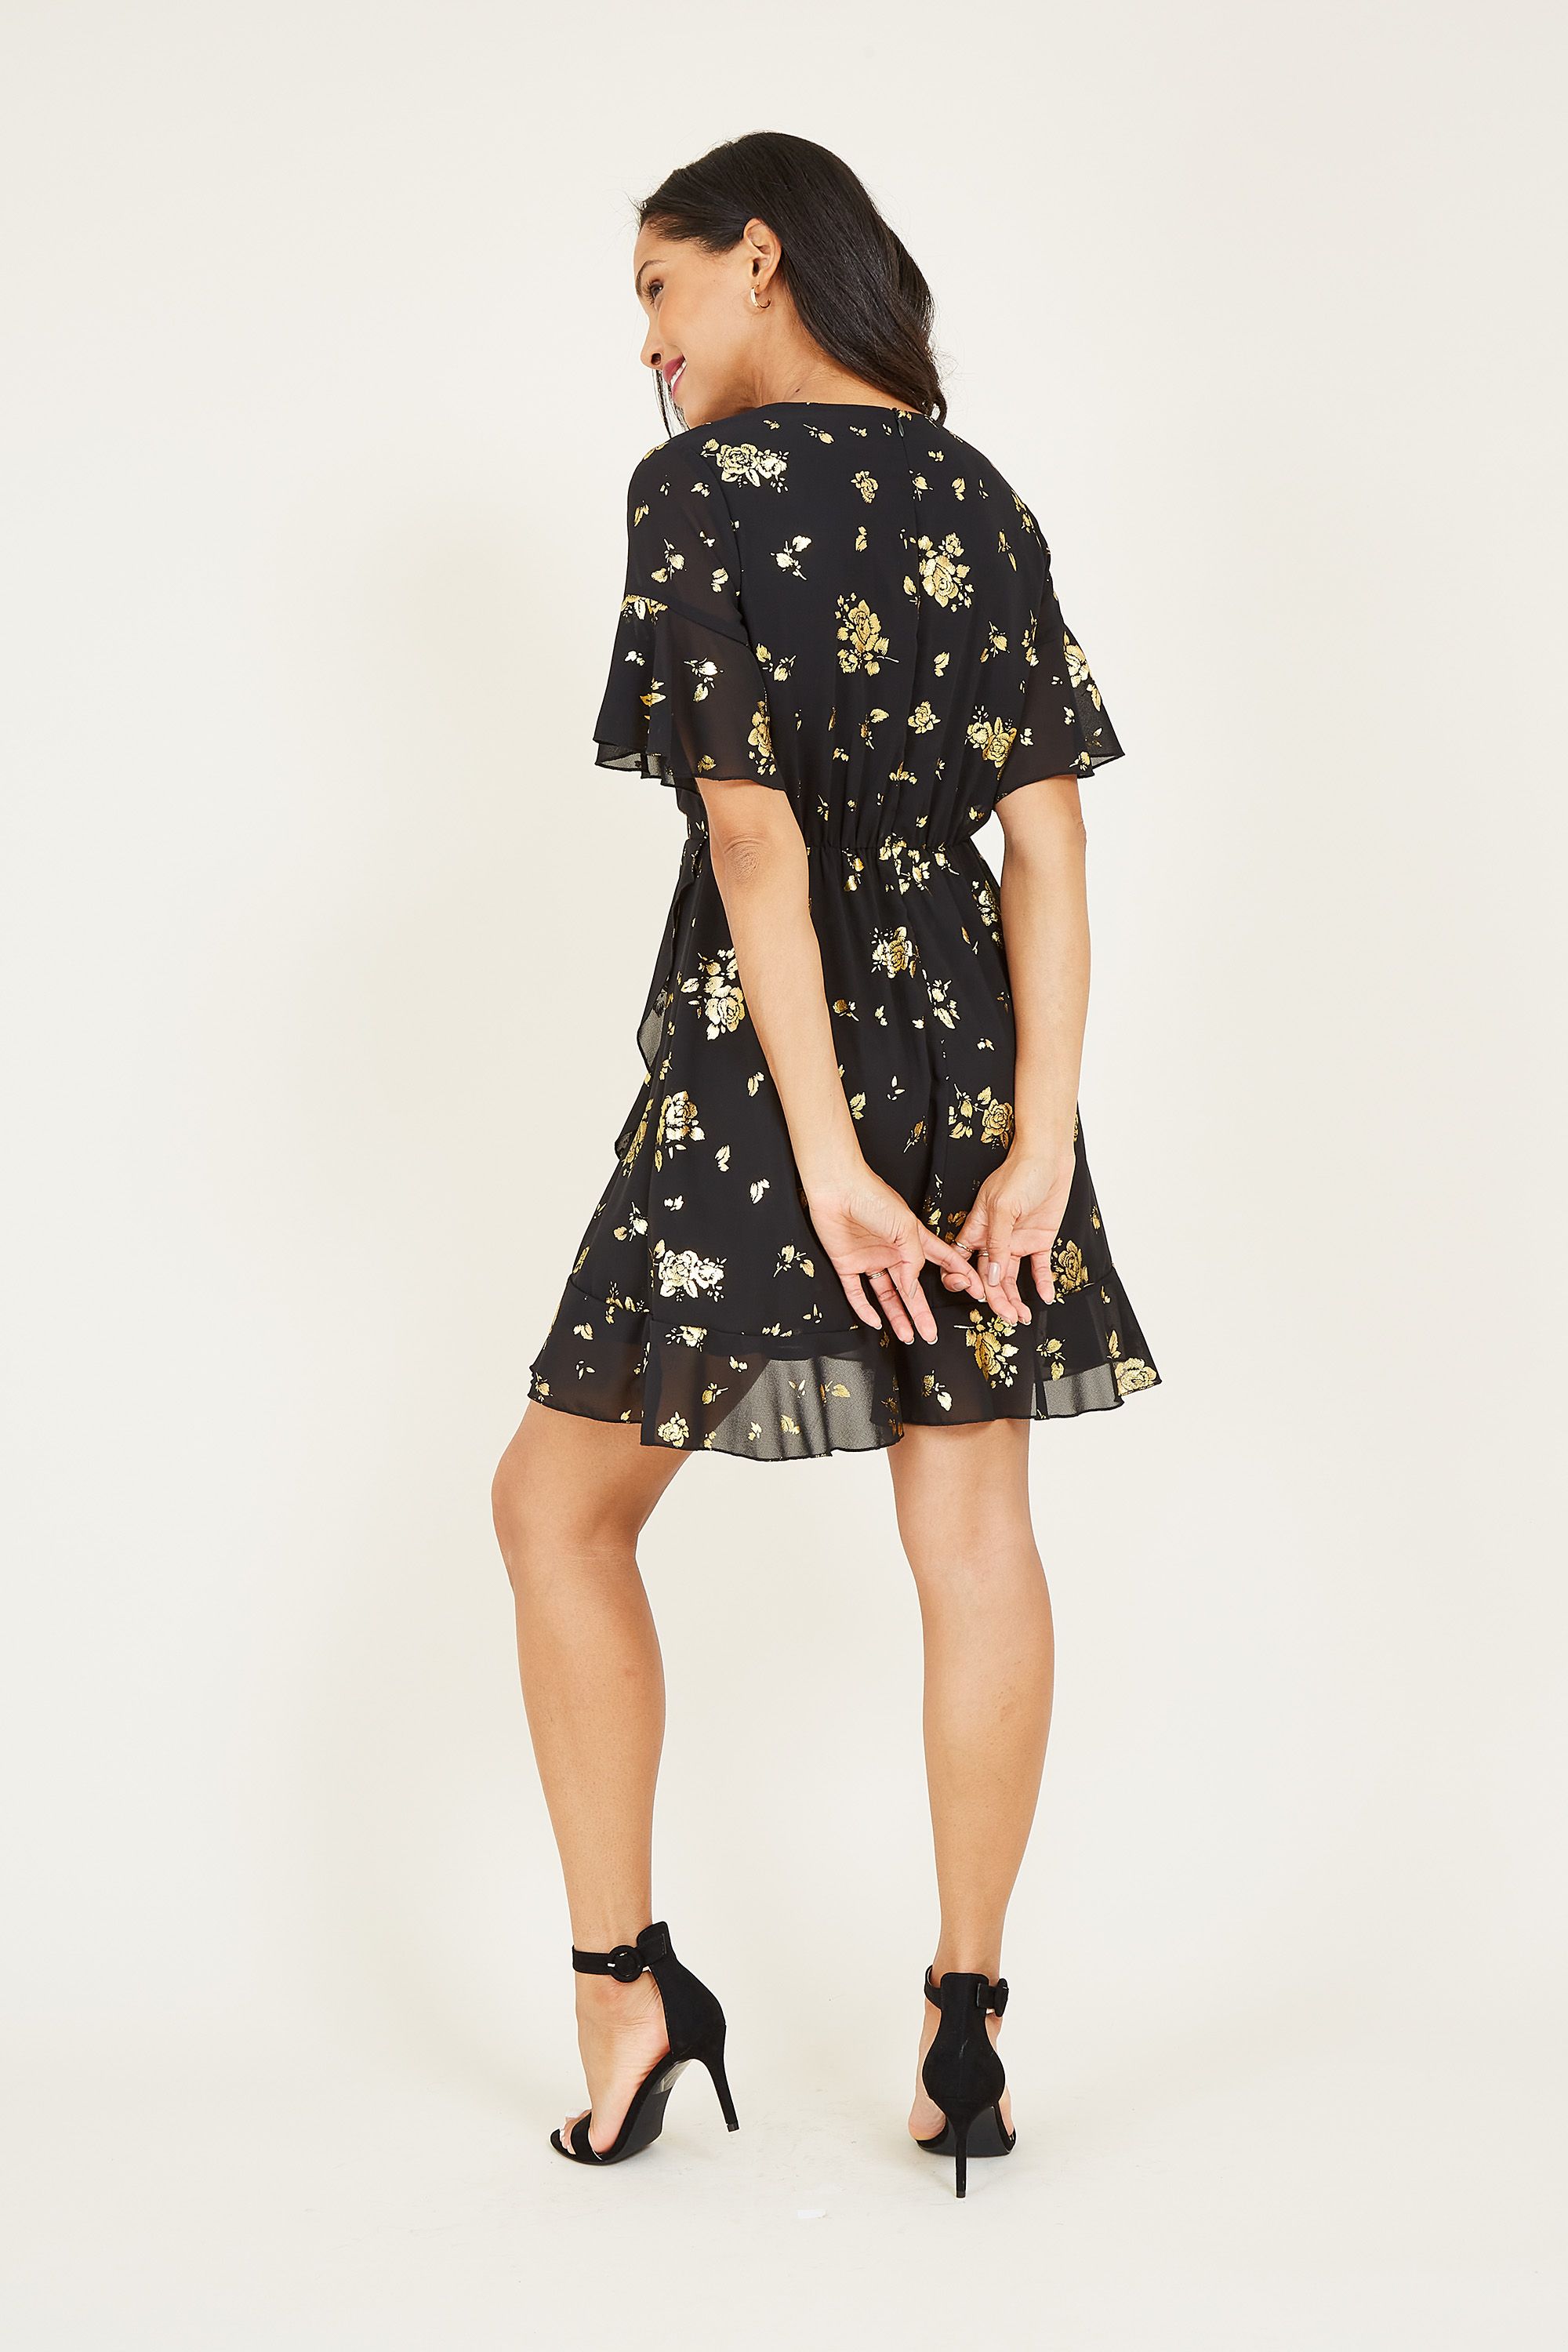 Printed with pretty foil florals running from the shoulder to the hemline, this Mela Foil Floral Skater Dress is a wardrobe hit. Featuring lightweight fabric that ties at the waist, it's styled with short floaty sleeves and gentle ruffles. A lining runs undernetah to aid movement, accessorize with anything from trainers to heels.